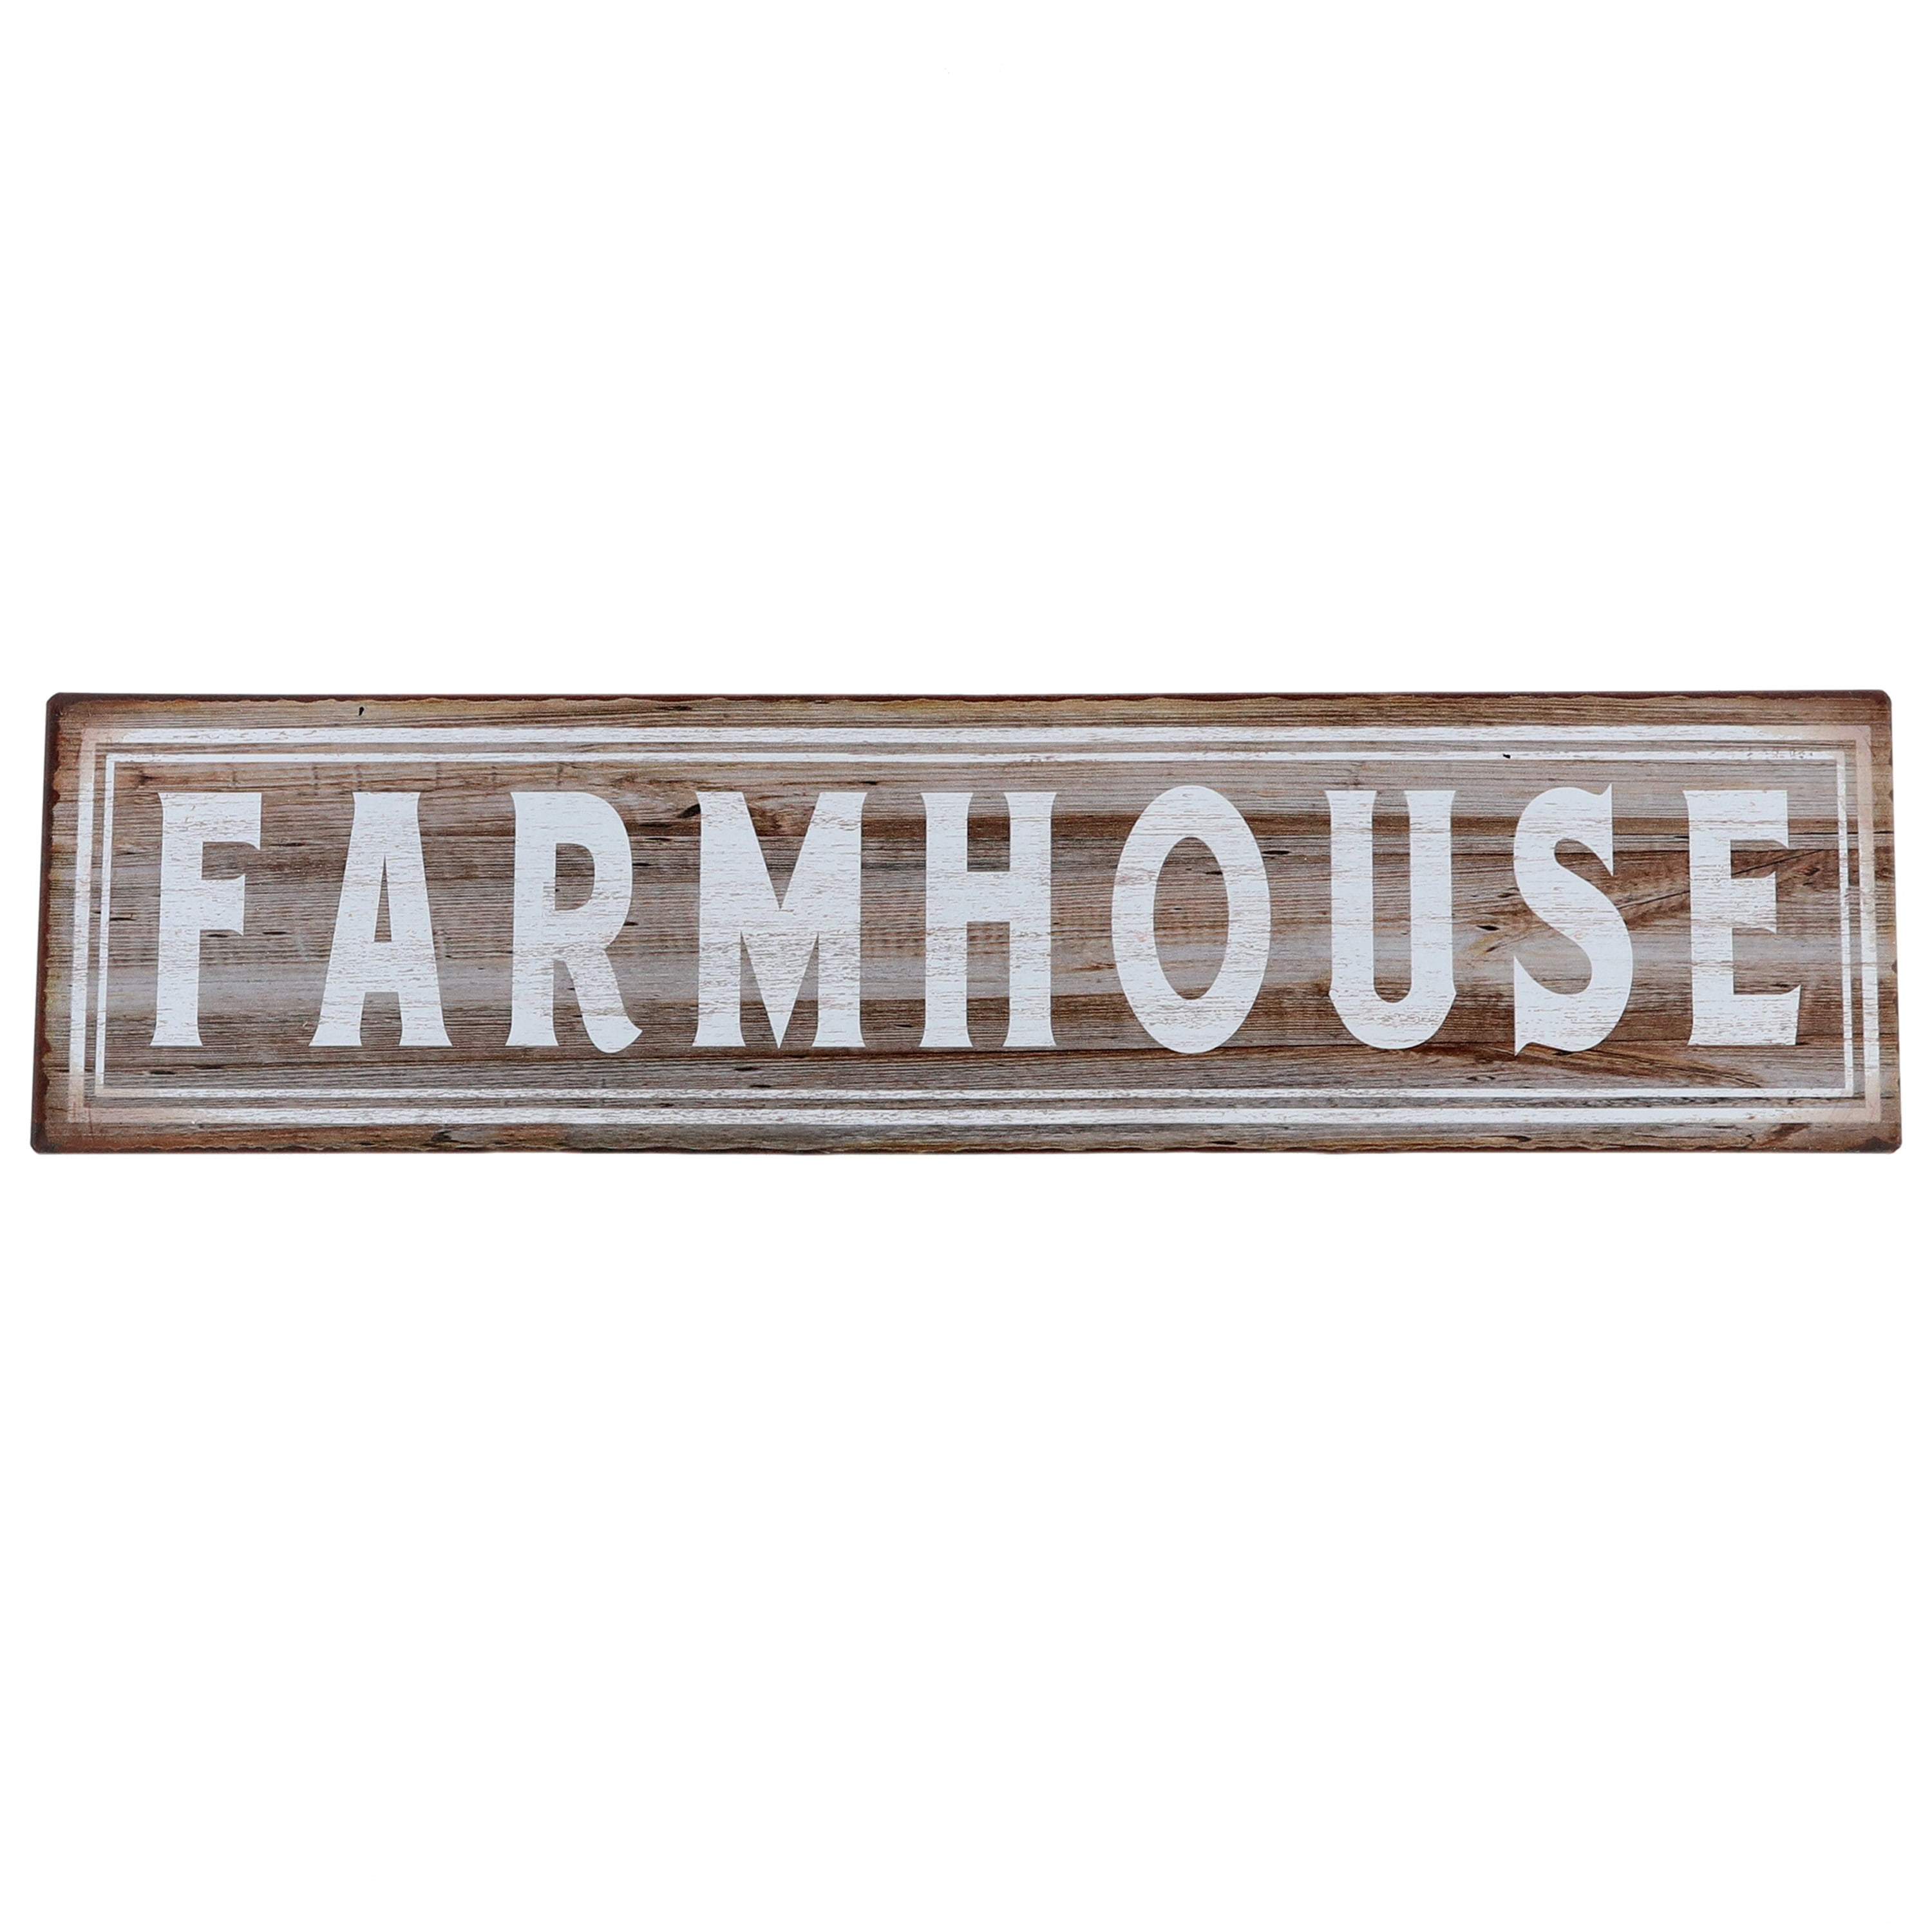 Phone Kitchen Farmhouse Bed and Breakfast Rustic Custom Metal Sign Telephone Sign Rustic Street Sign or Door Name Plate Plaque